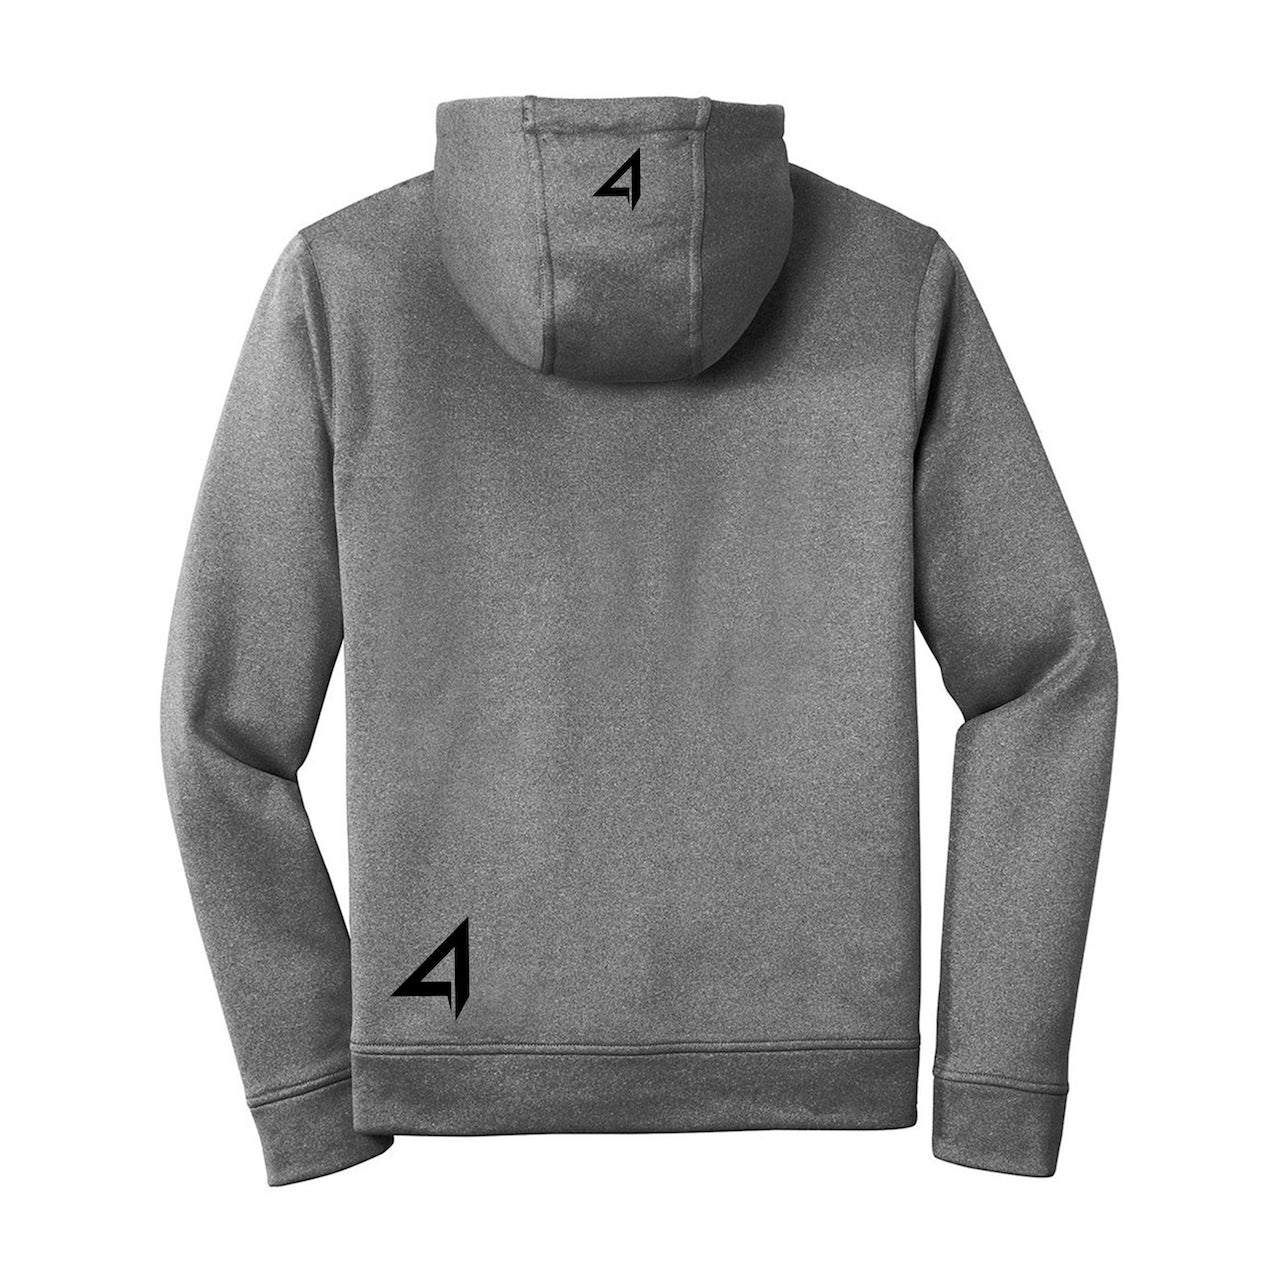 4ORE TOUR HOODIE [GRAY] LIMITED EDITION - 4ORE NUTRITION 4ORE TOUR HOODIE [GRAY] LIMITED EDITION HOODIE (5896948482209)